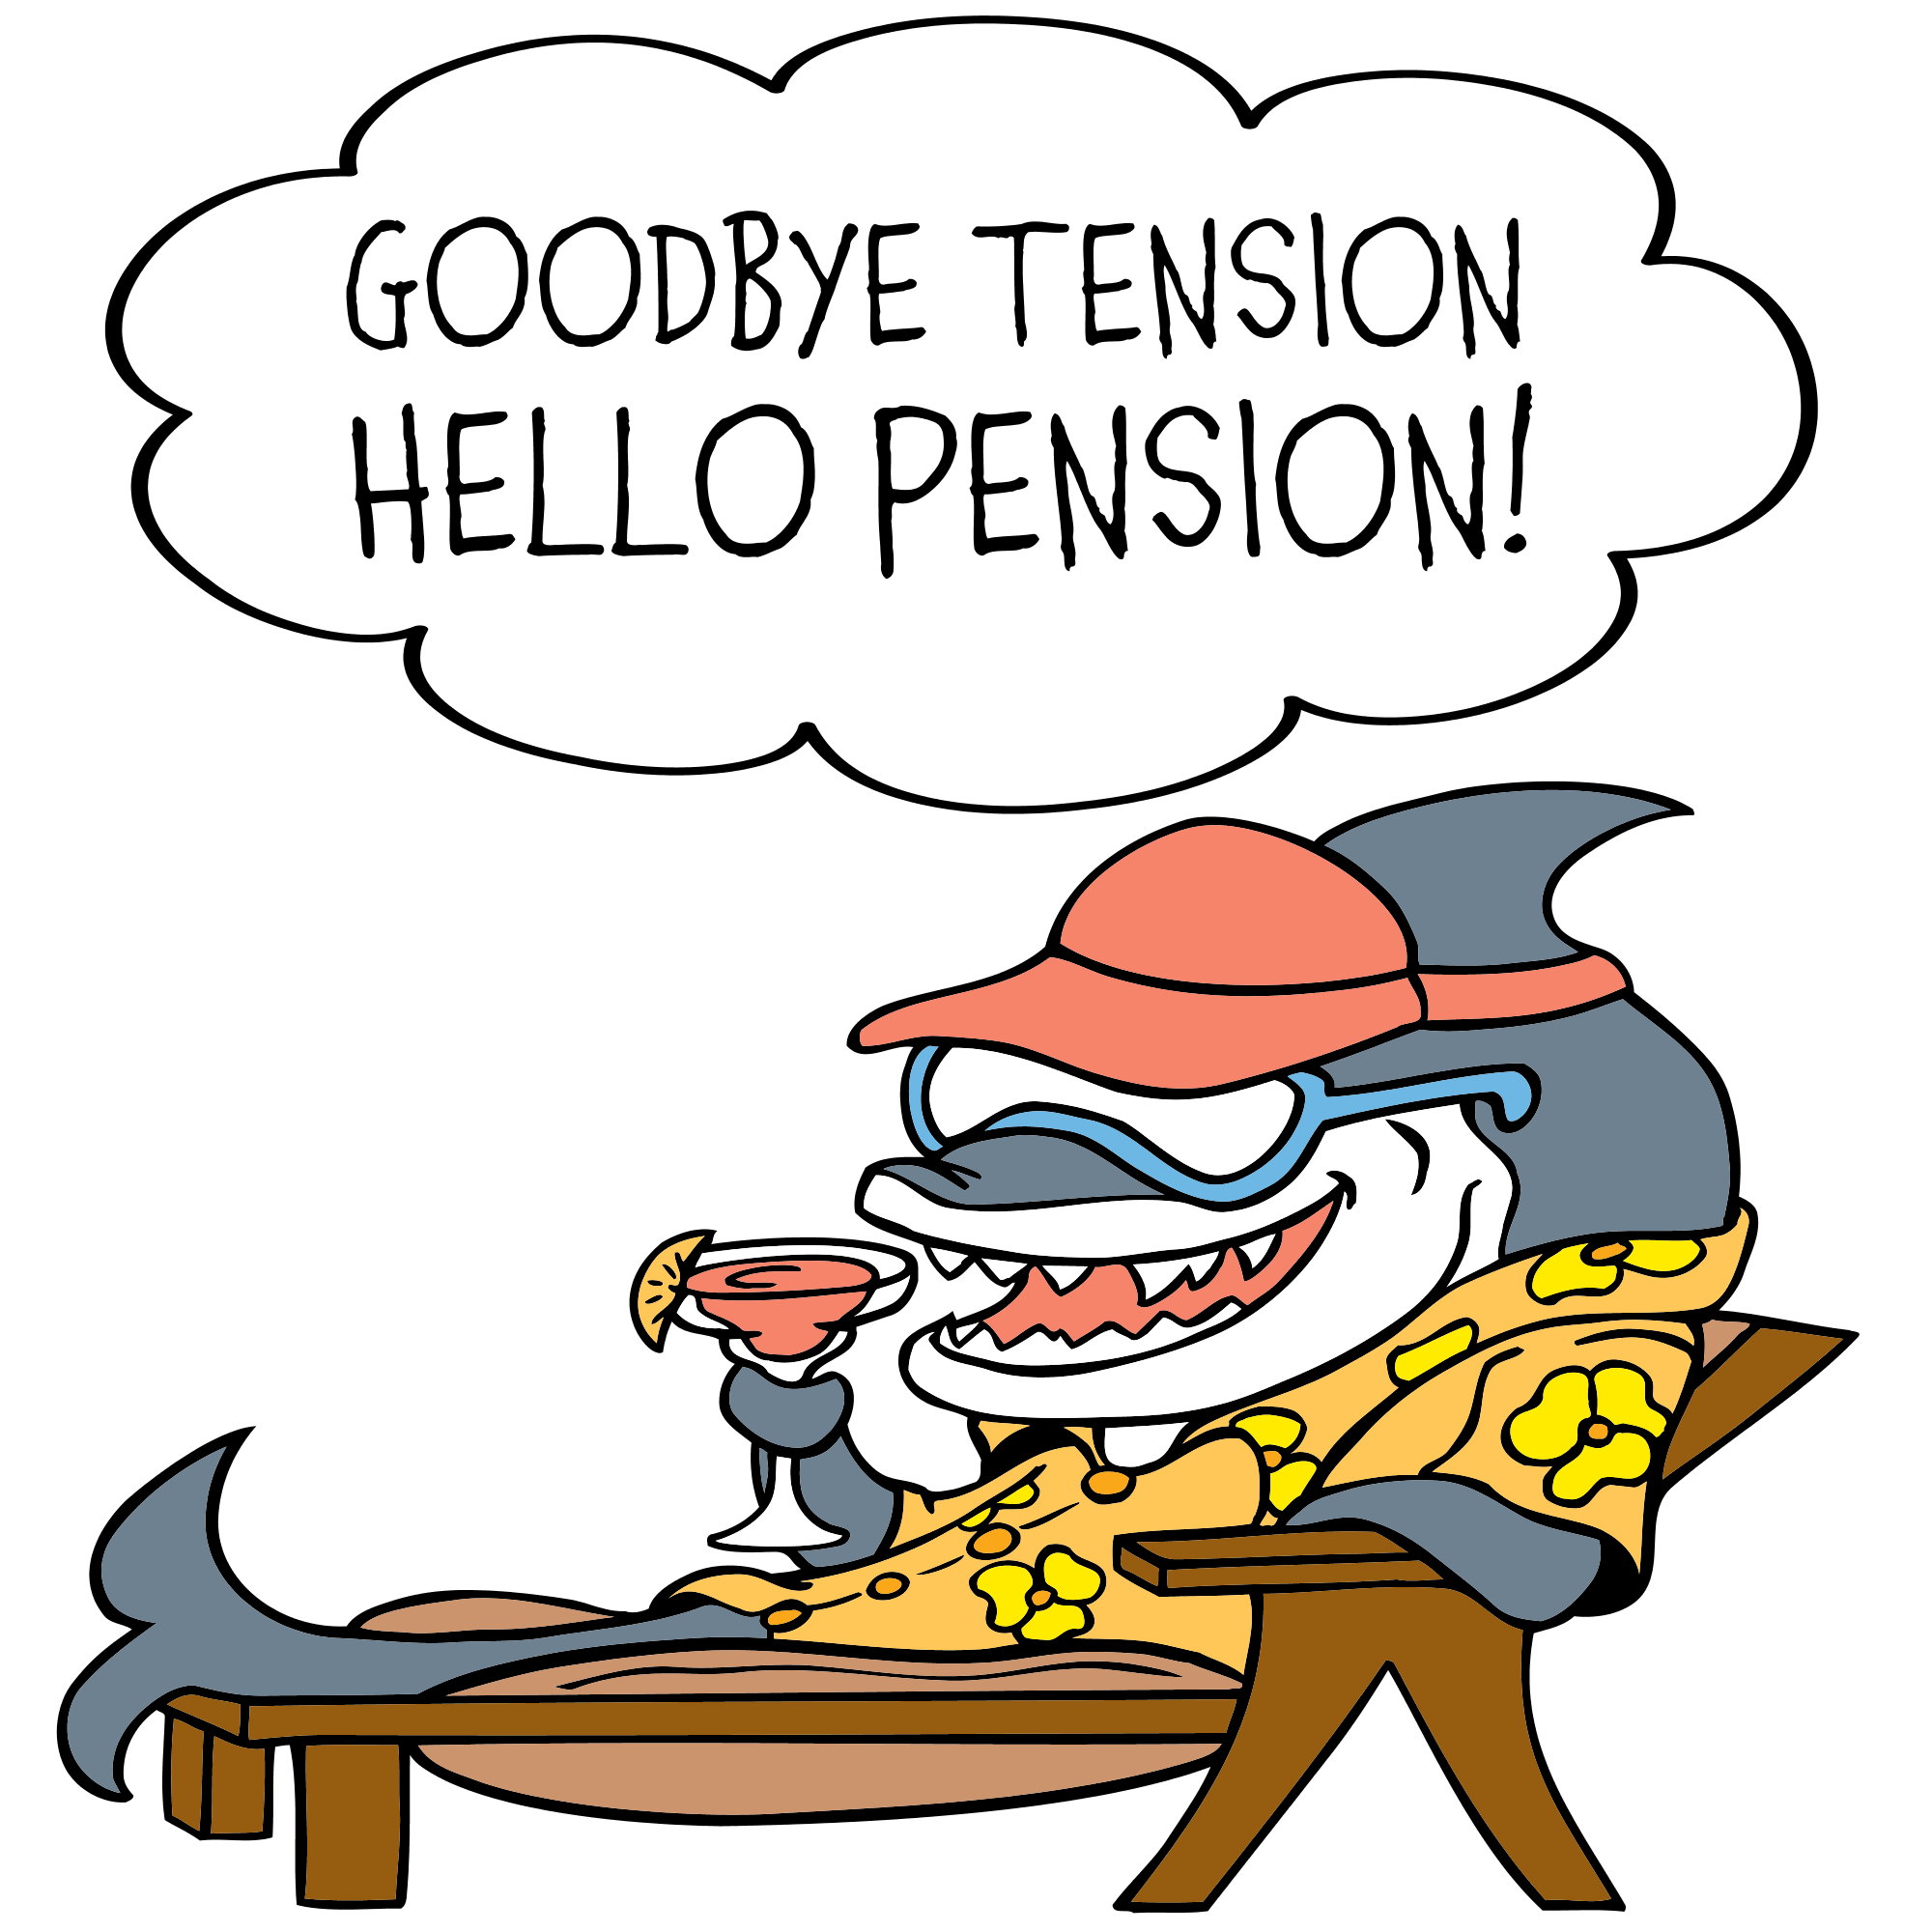 Collection Of Retirement Clipart Free Download Best Retirement